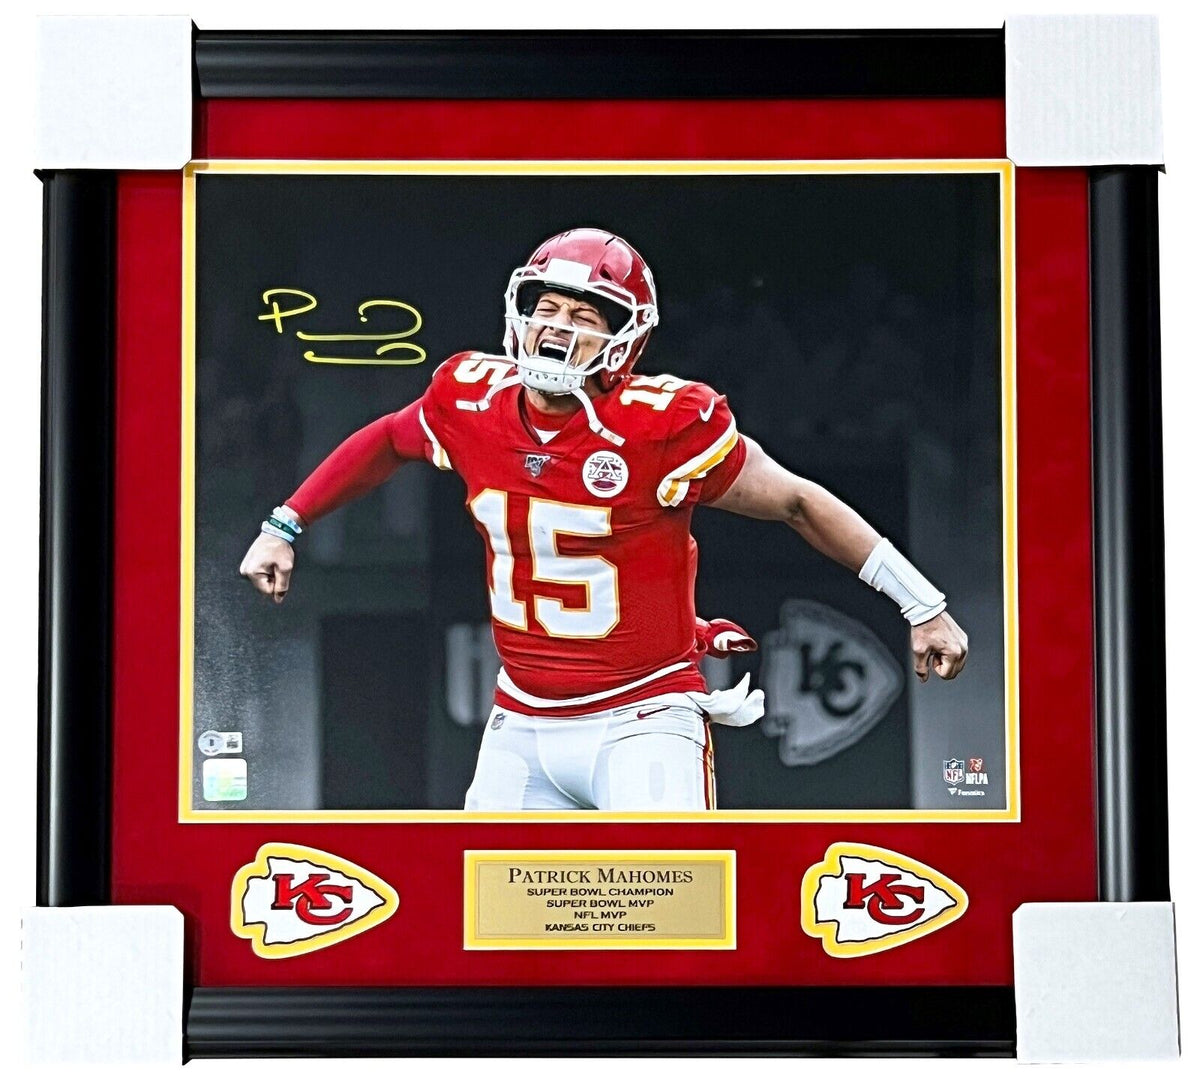 PATRICK MAHOMES AUTOGRAPHED HAND SIGNED AND CUSTOM FRAMED CHIEFS JERSEY